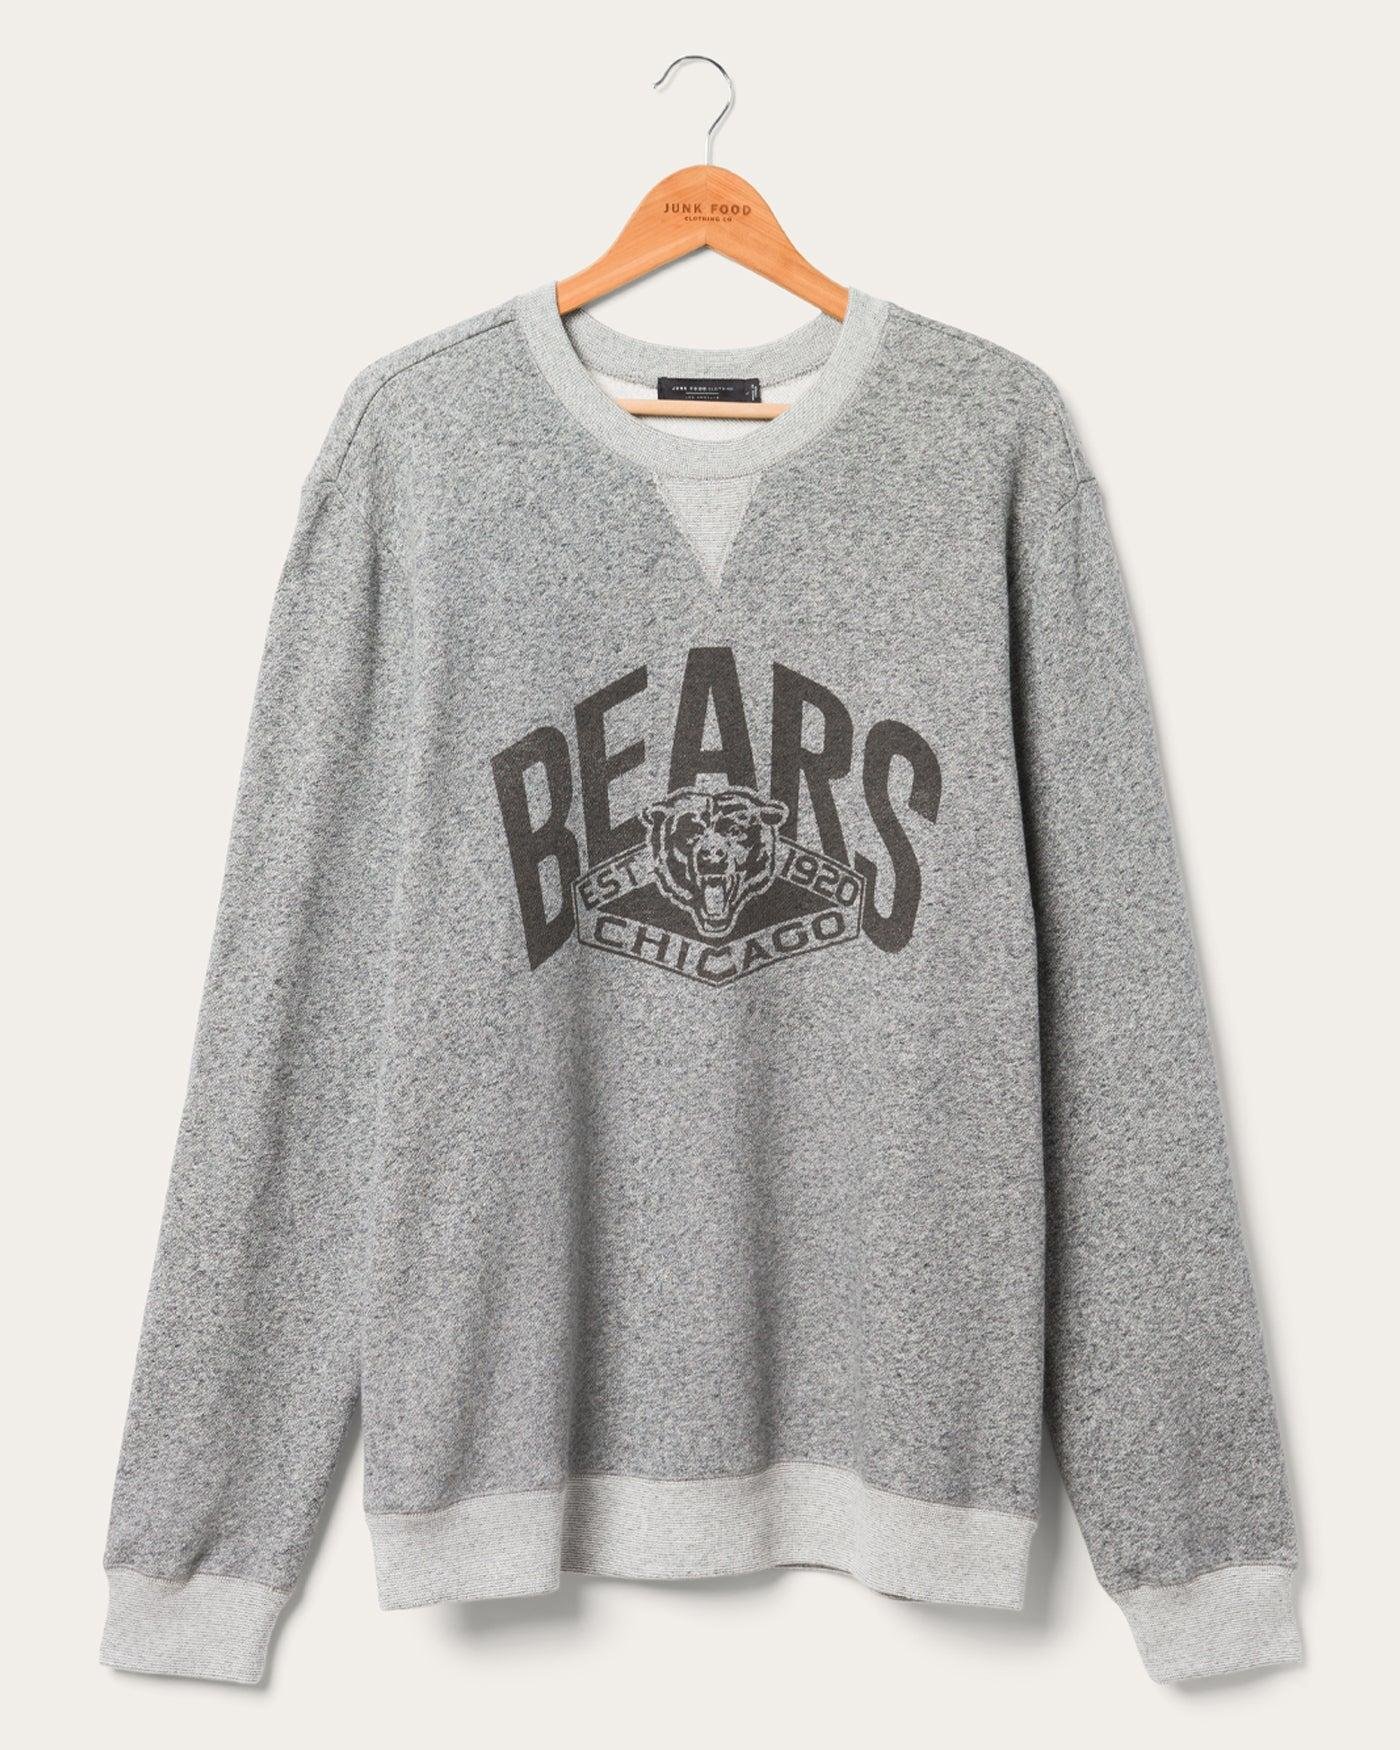 Junk Food Clothing Bears Formation Fleece Pullover by JUNK FOOD CLOTHING